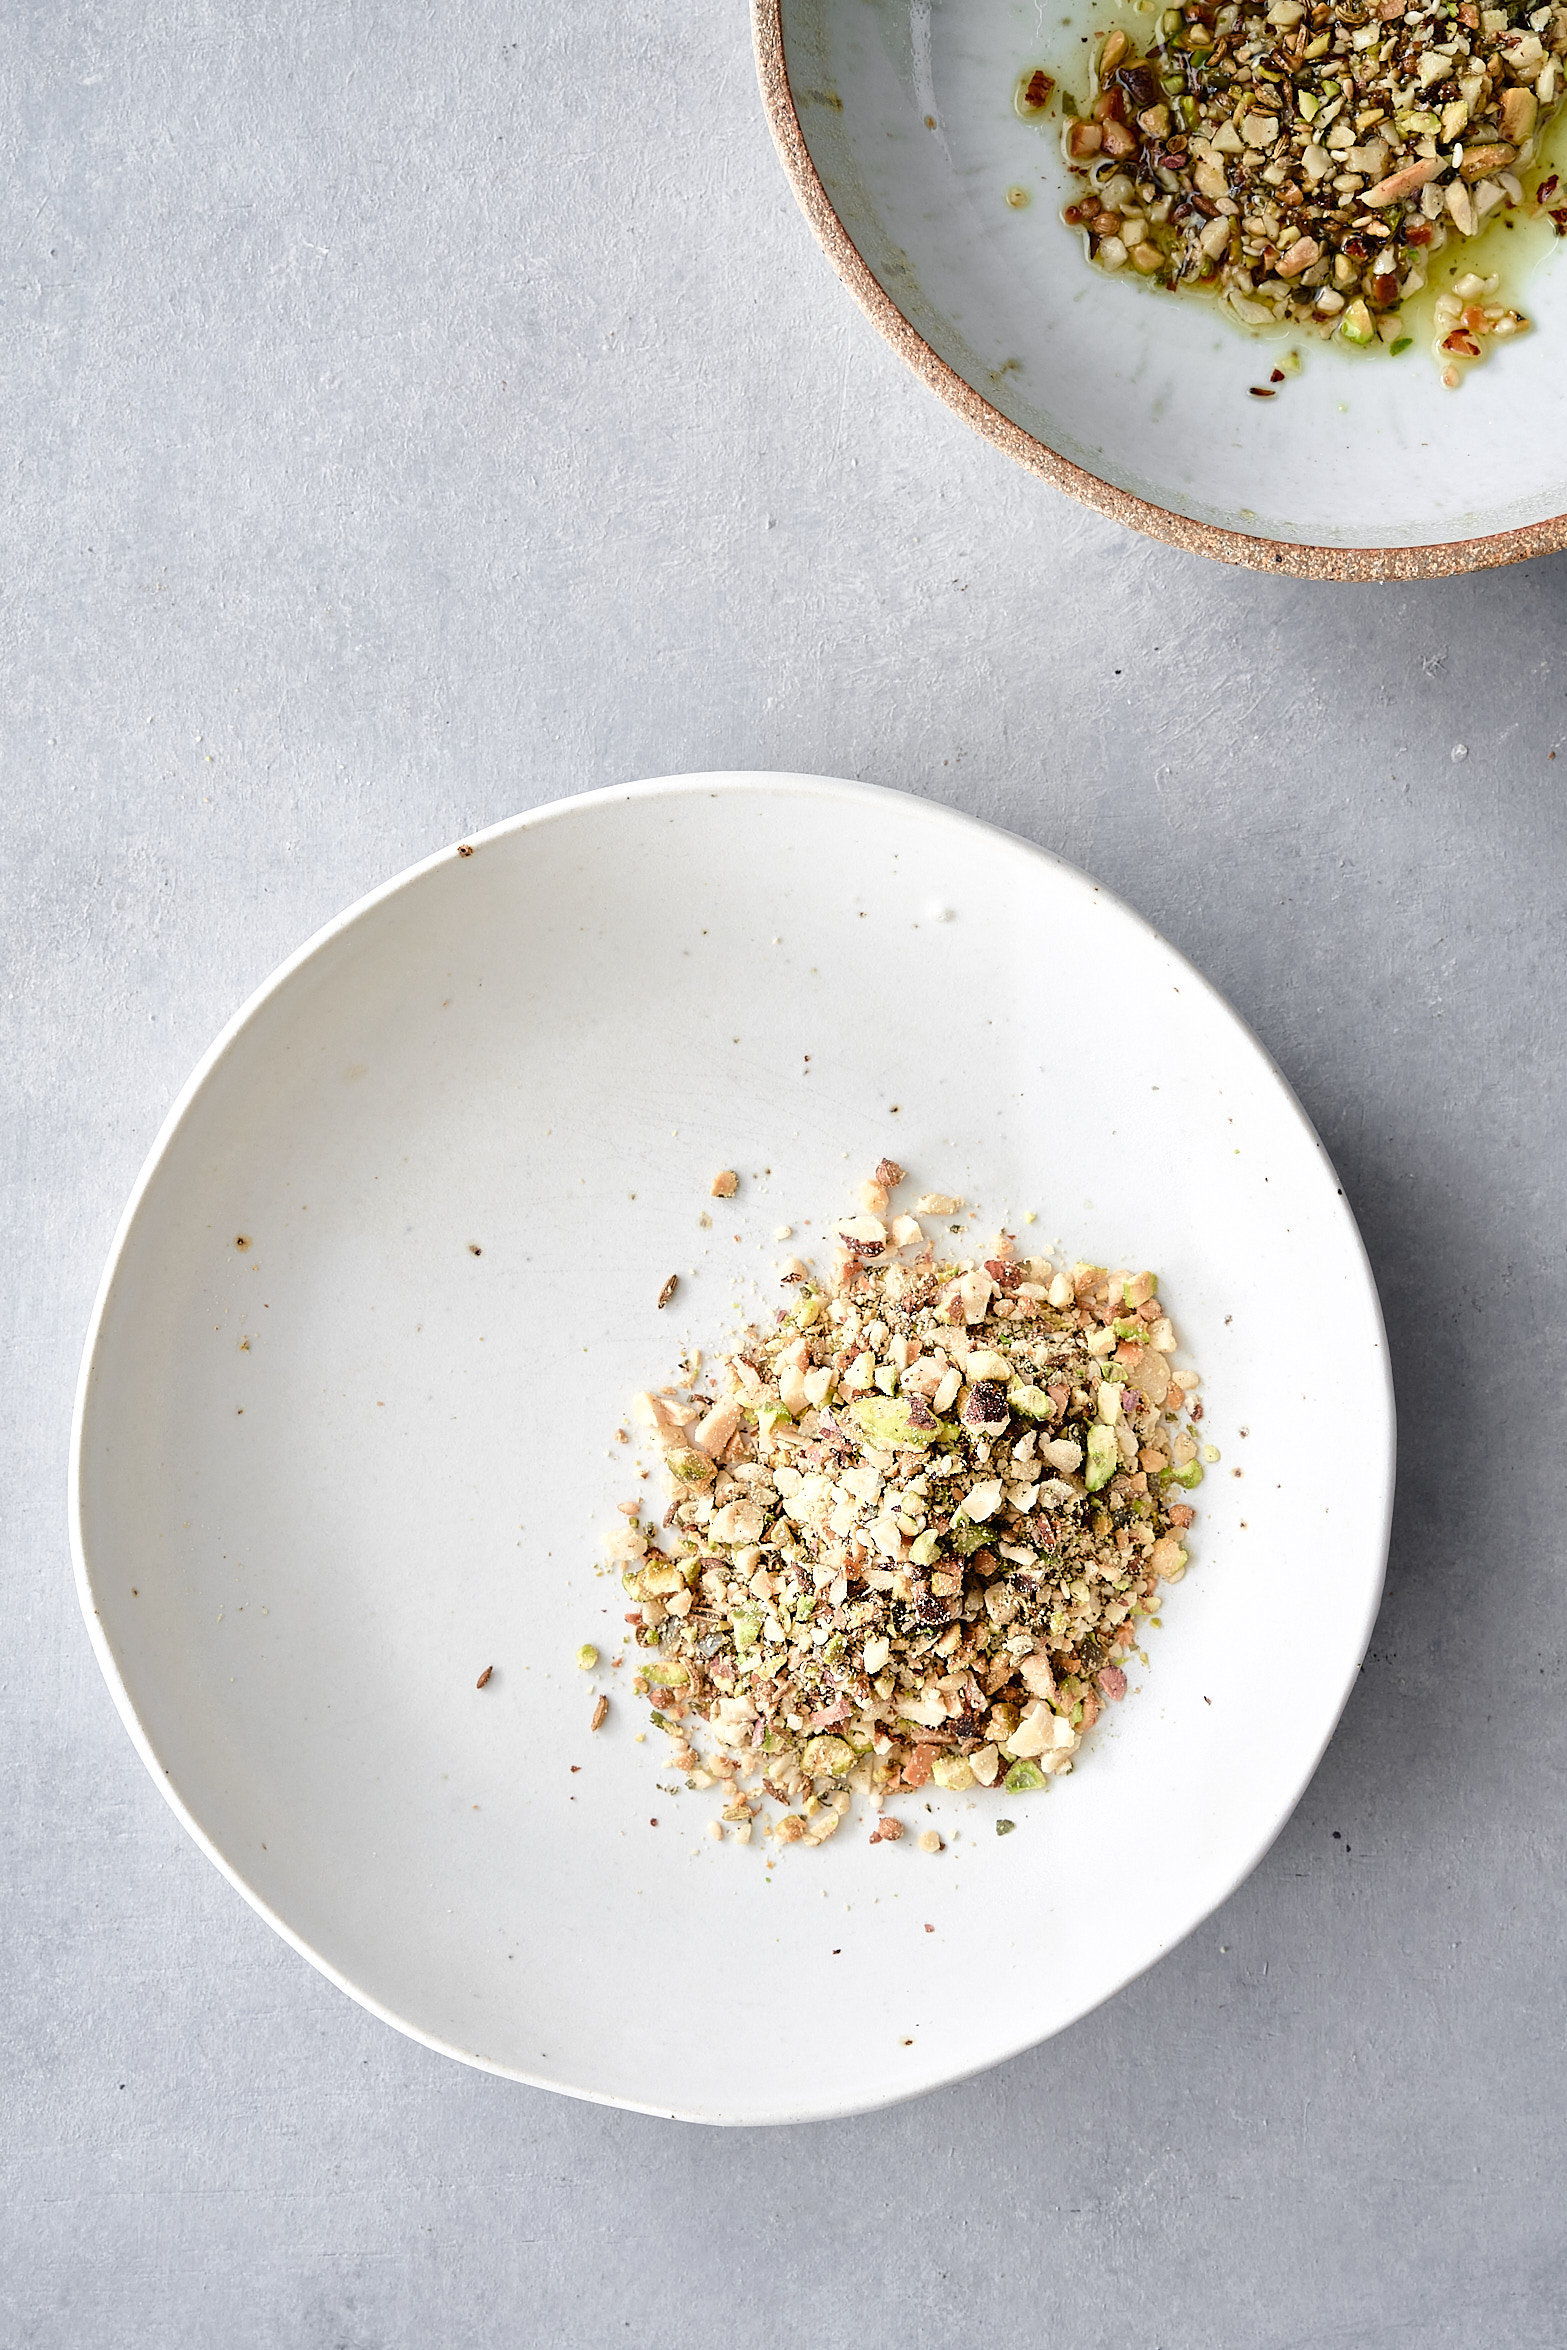 Easy pistachio dukkah recipe with nuts and seeds